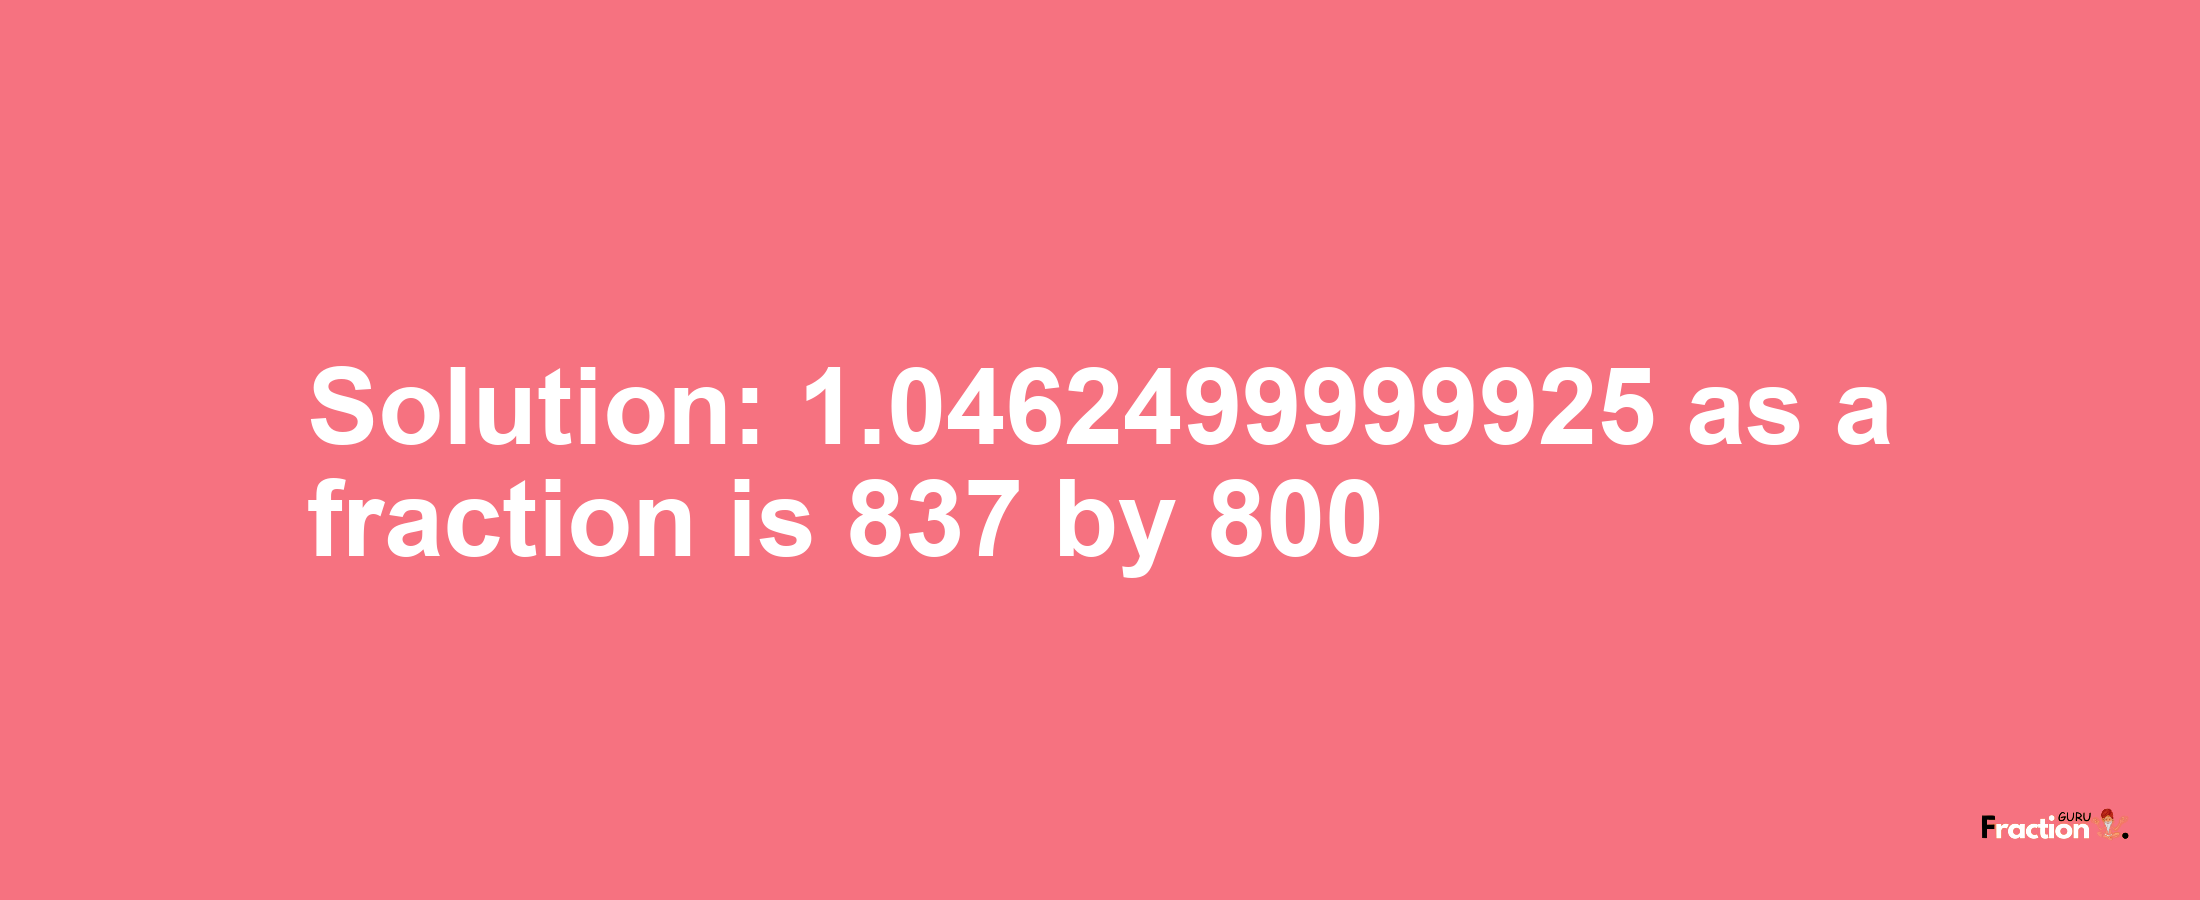 Solution:1.0462499999925 as a fraction is 837/800